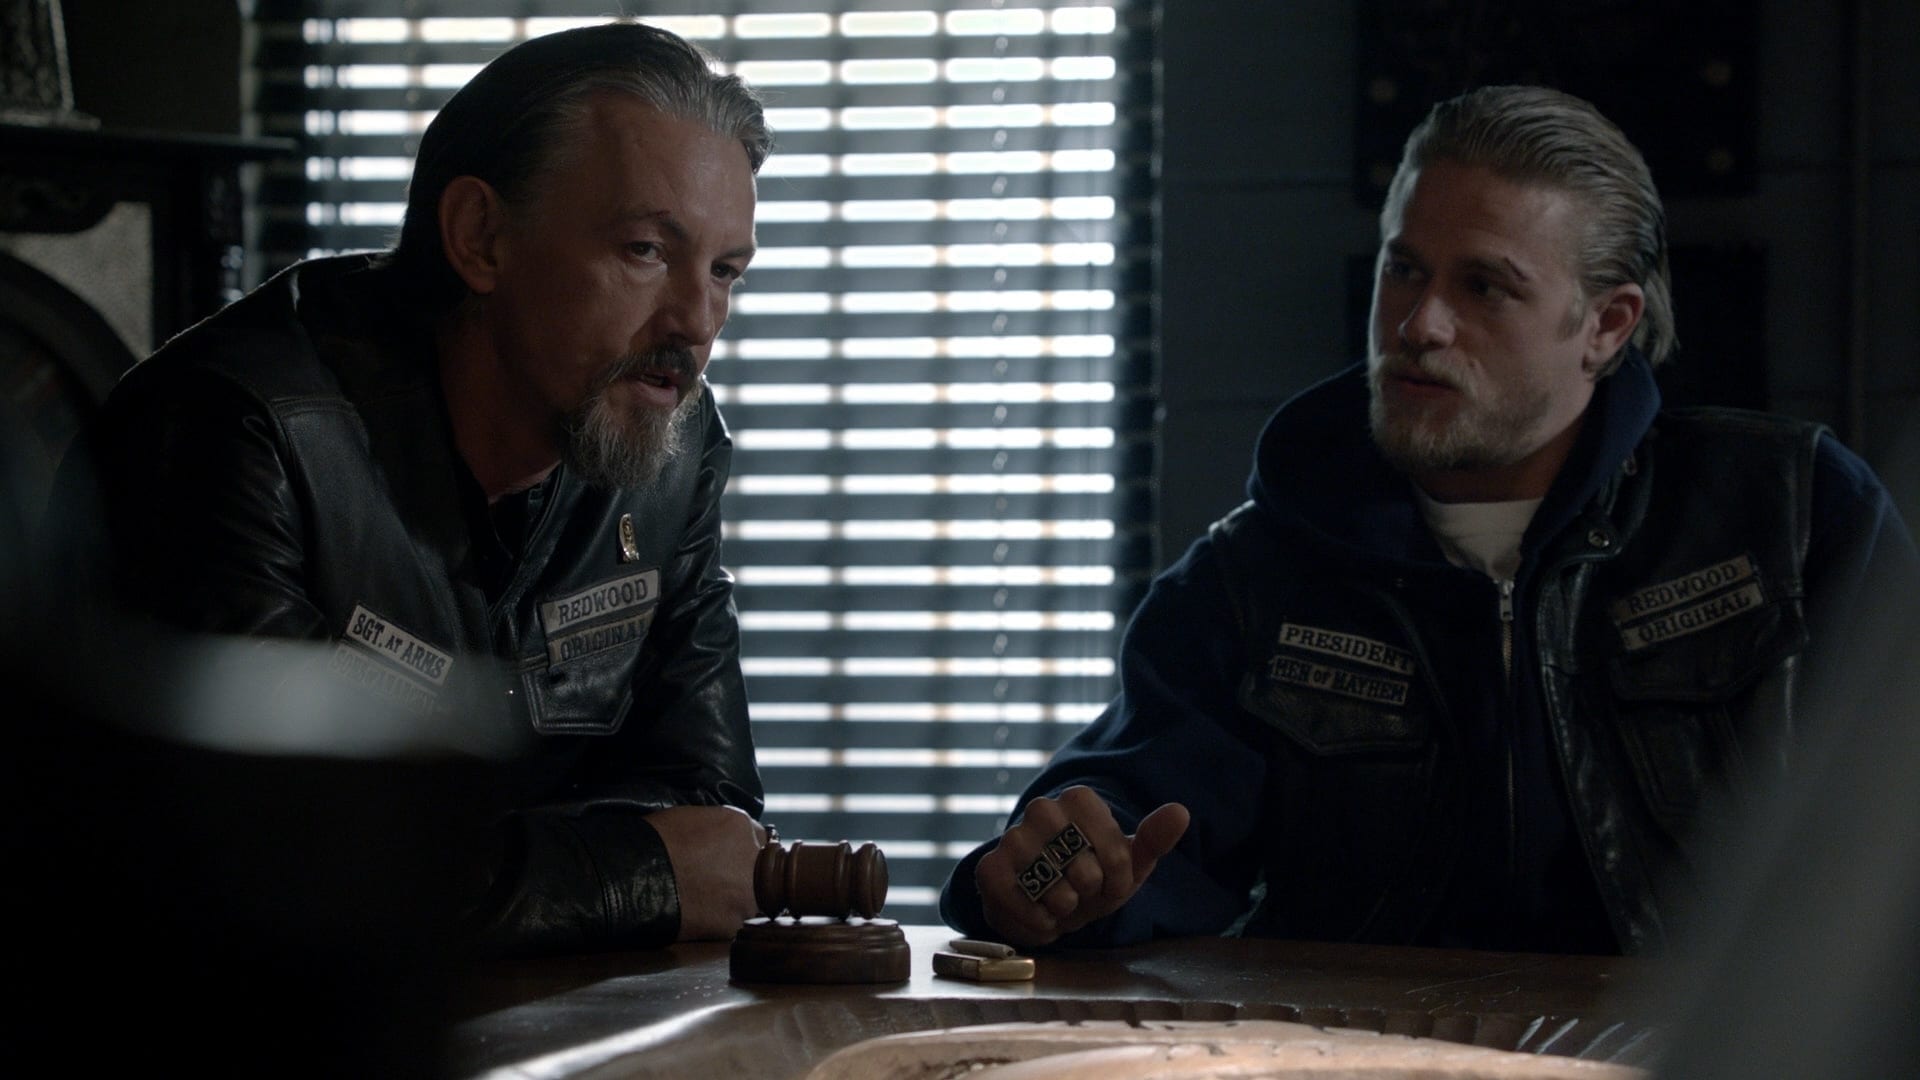 Sons of Anarchy: Season 5 Episode 5 - Orca Shrugged.